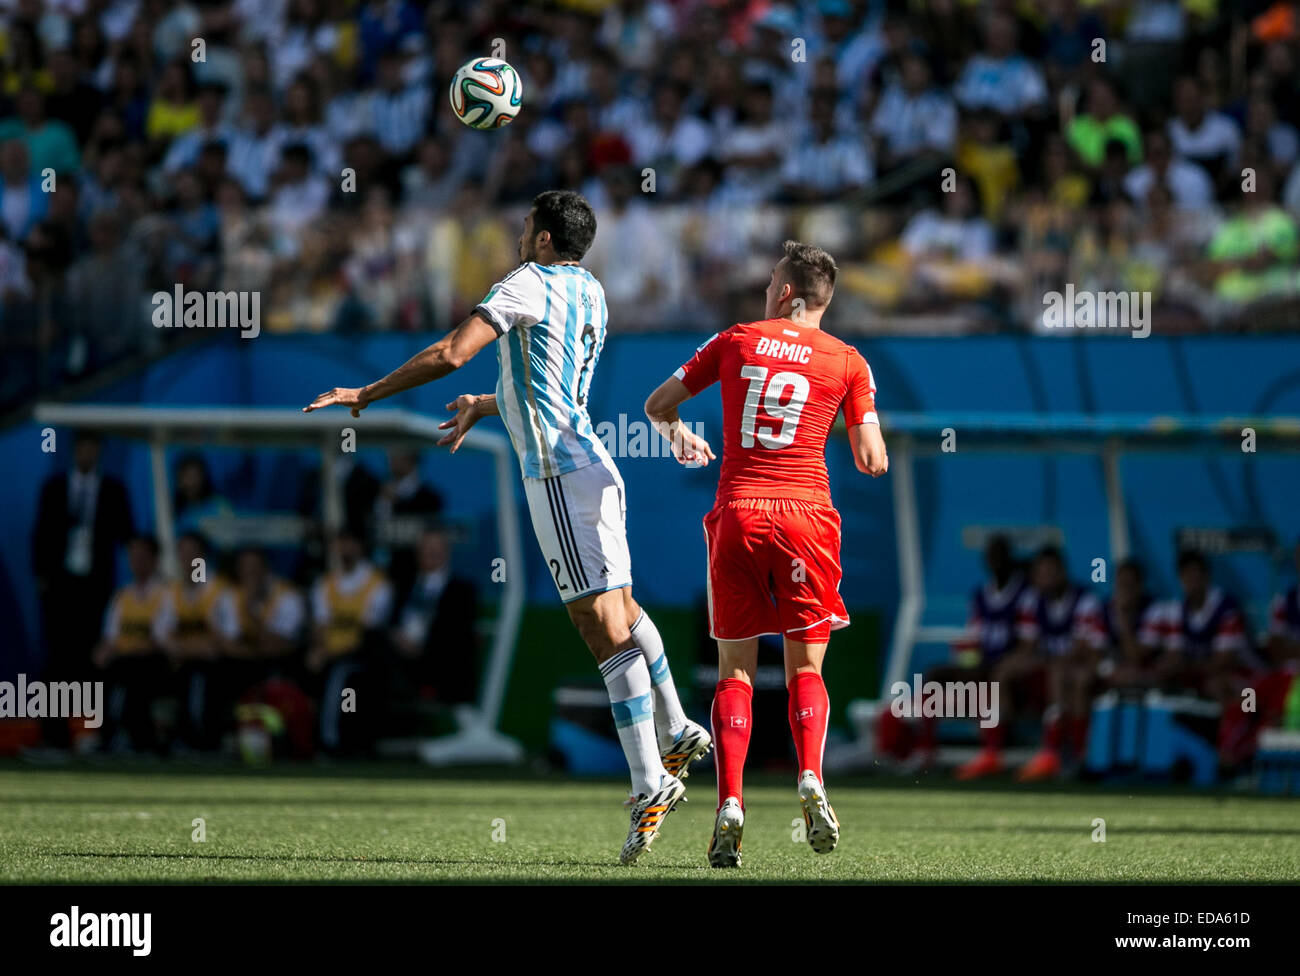 2014 FIFA World Cup - Round 16 - Argentina vs. Switzerland match held at Arena Corinthians. Argentina went on to defeat Switzerland, 1 - 0.  Featuring: Marcos Rojo,Josip Drmic Where: Sao Paulo, Brazil When: 01 Jul 2014 Stock Photo